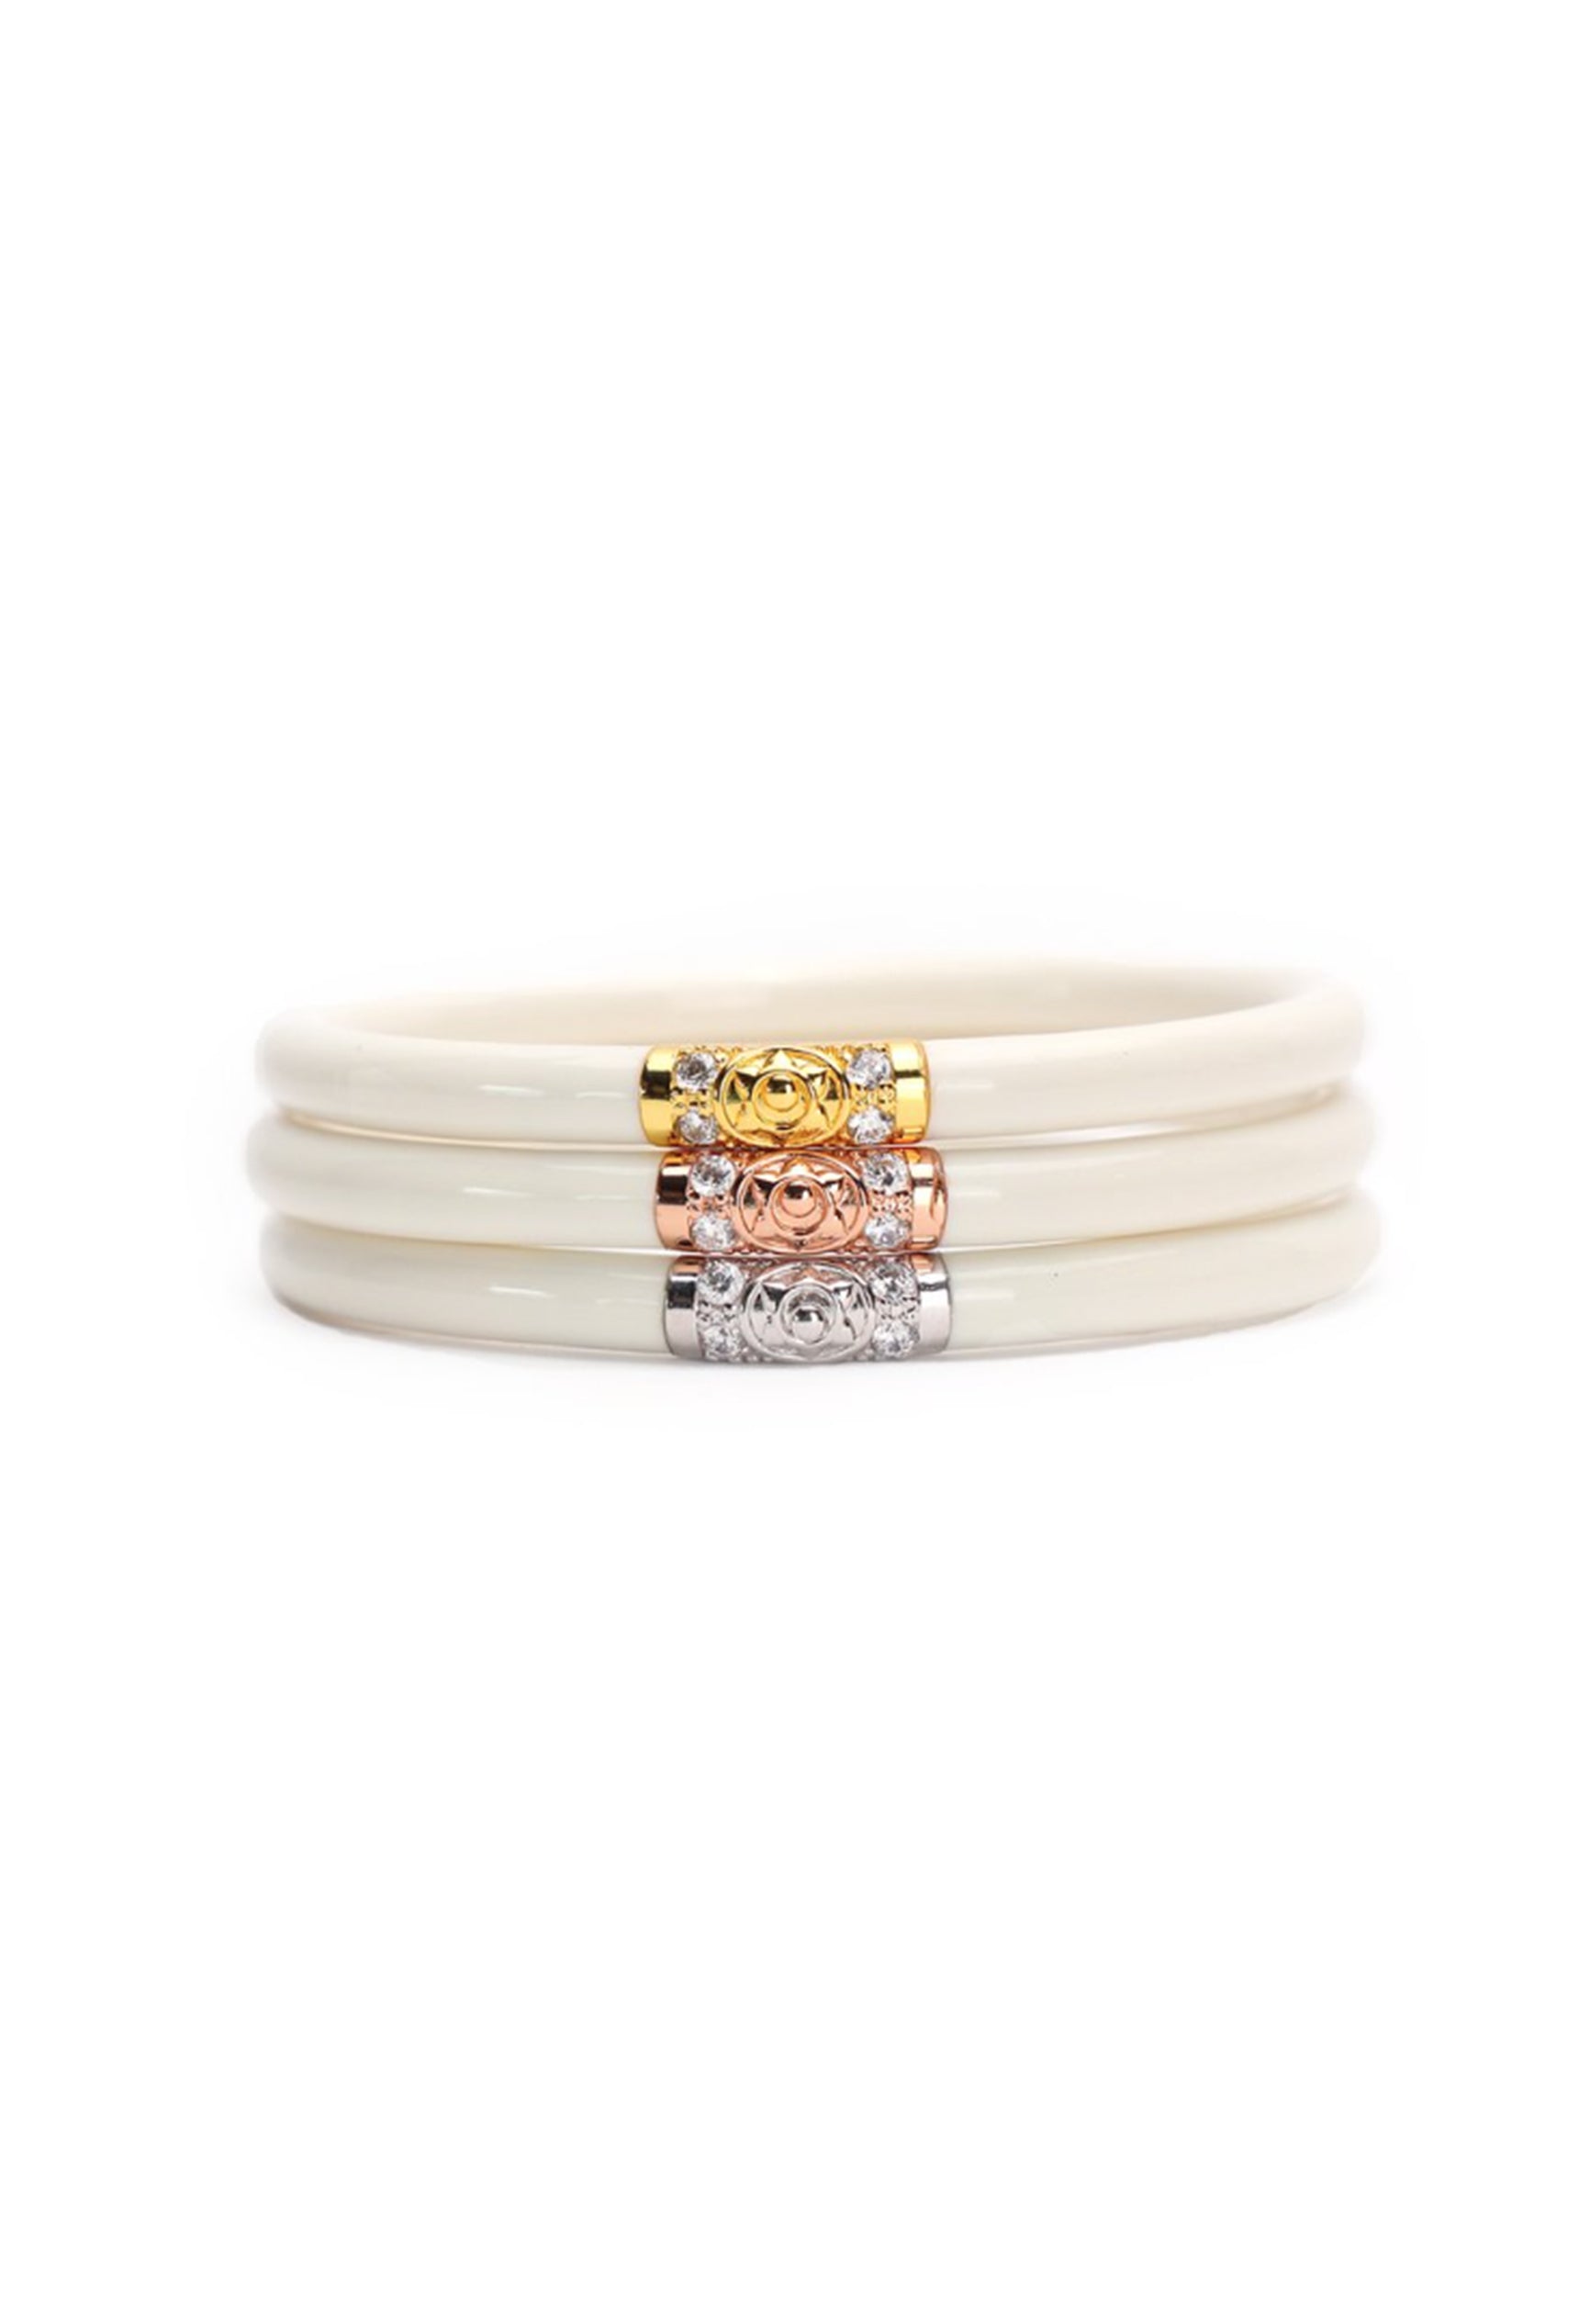 BUDHAGIRL Three Kings All Weather Bangles in Ivory